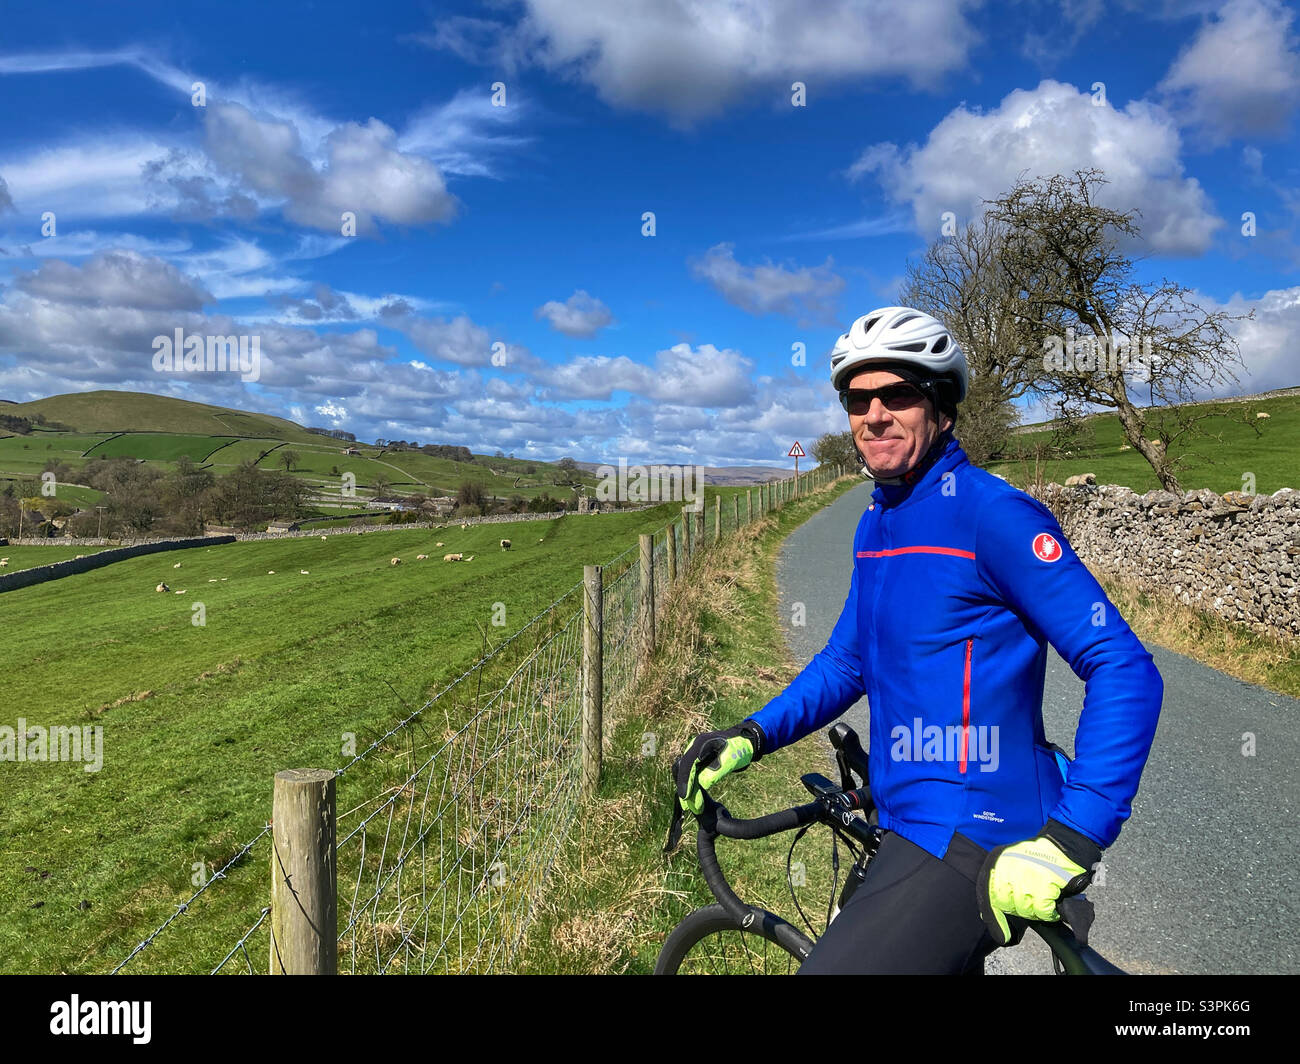 Cyclist wearing a blue jersey in Burnsall North Yorkshire Stock Photo